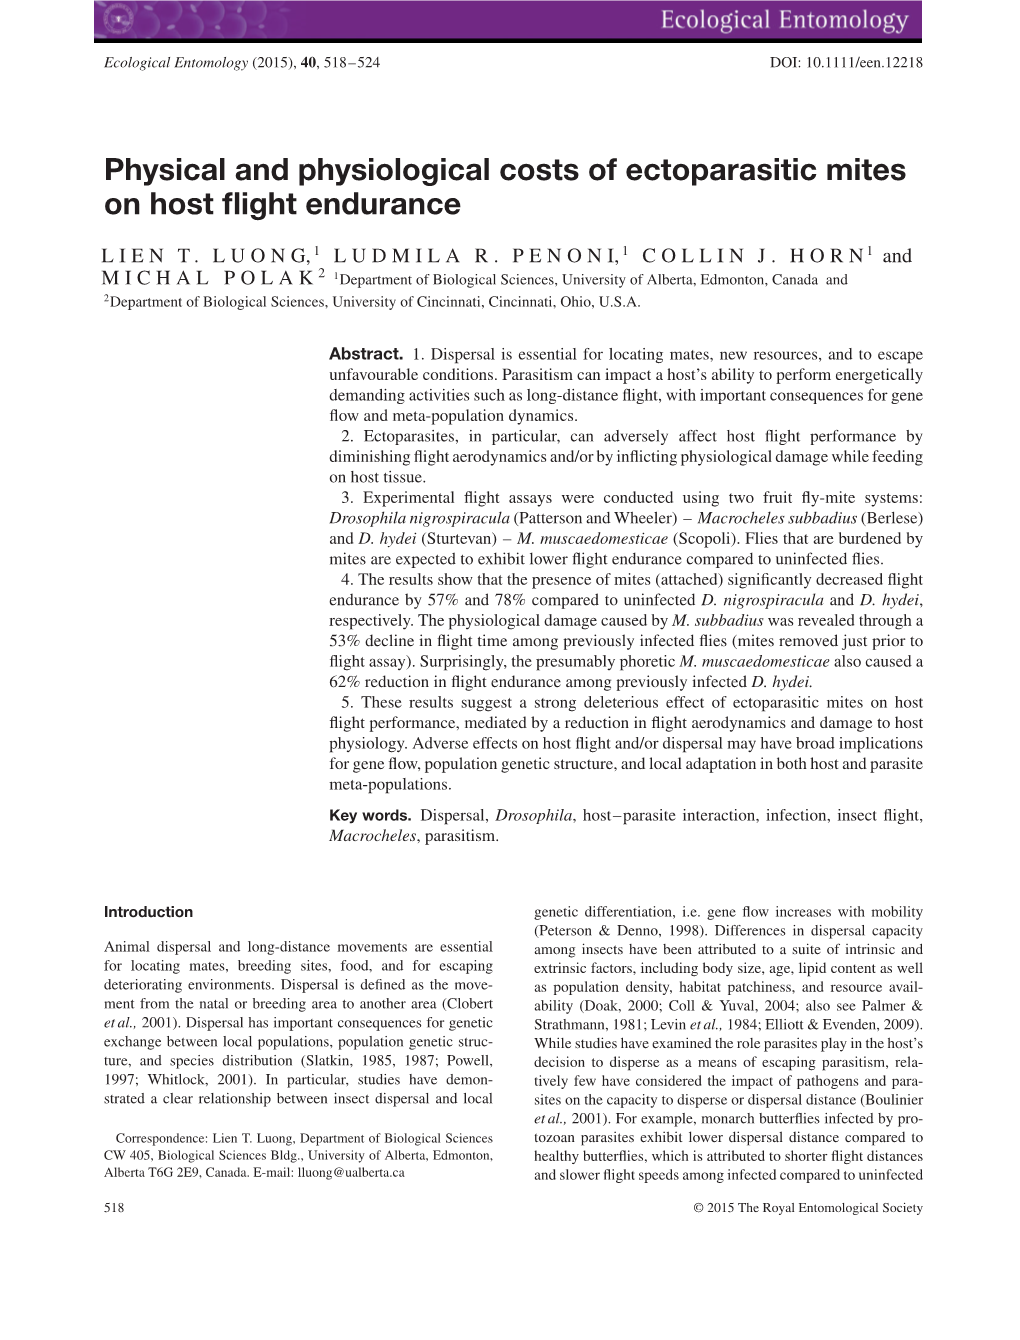 Physical and Physiological Costs of Ectoparasitic Mites on Host Flight